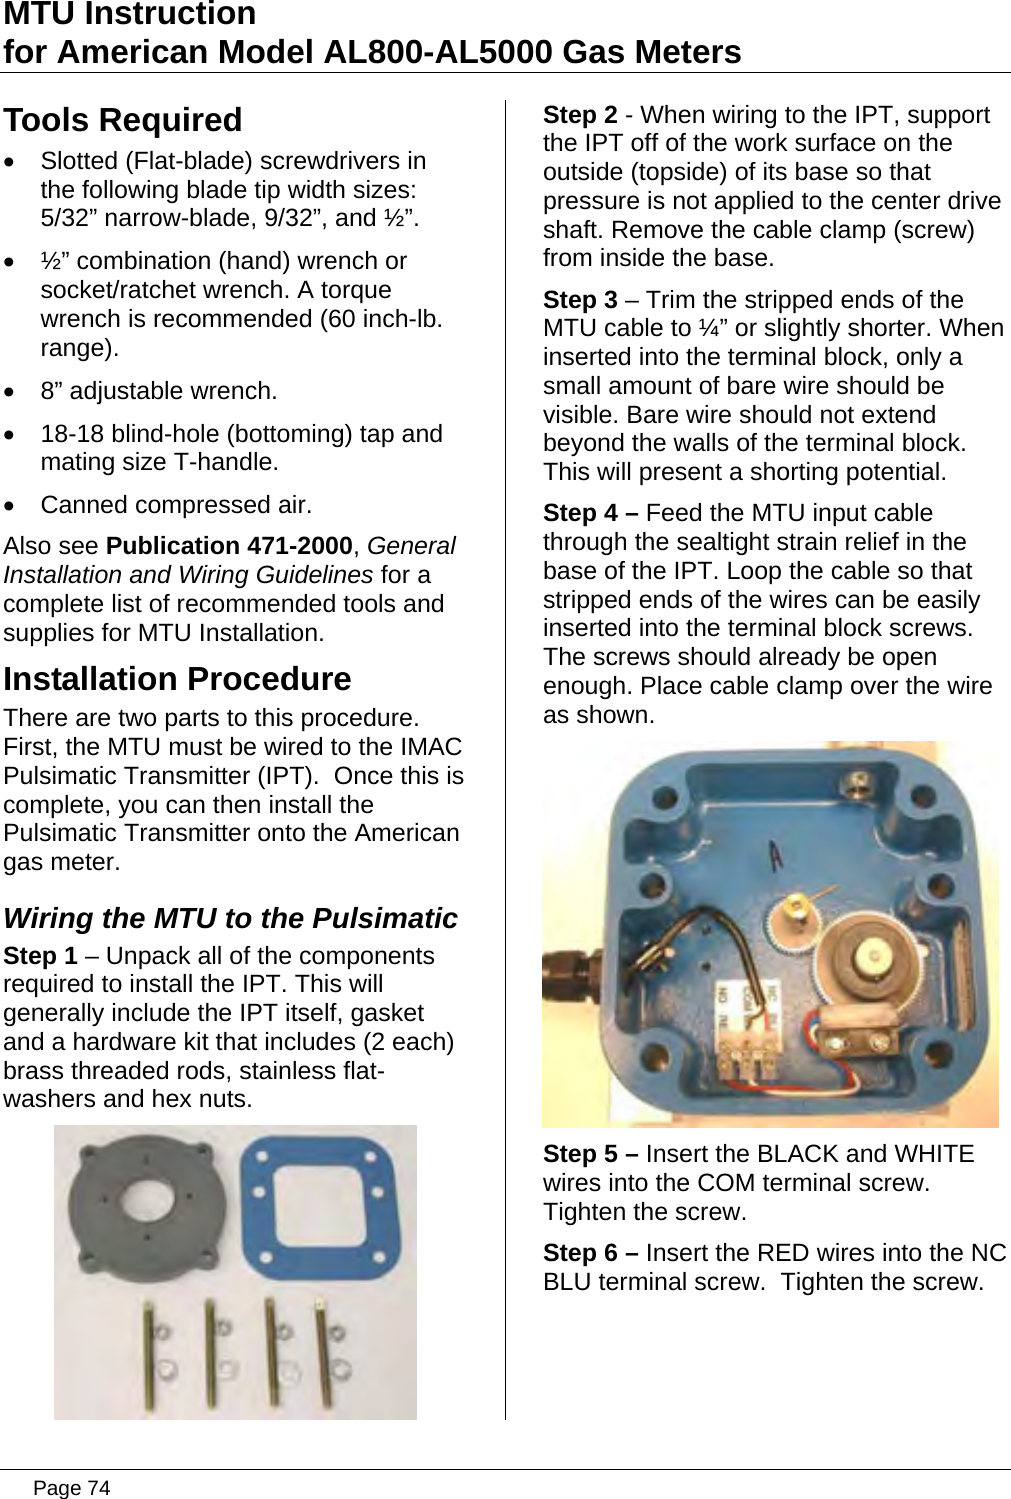 Page 74 of Aclara Technologies 09015 Transmitter for Meter Reading User Manual users manual